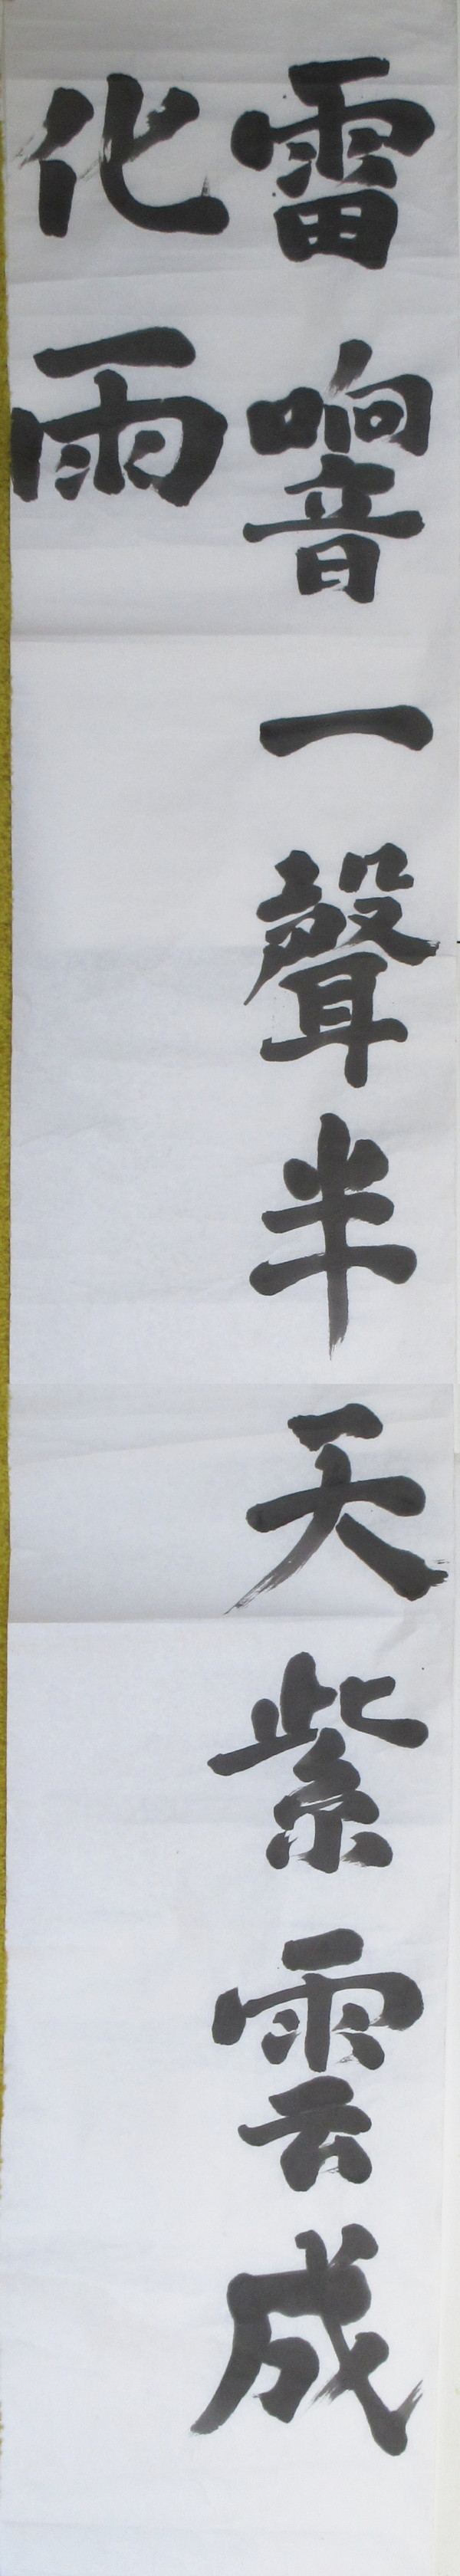 Calligraphy Panel 2 by Kwan Y. Jung Attributed